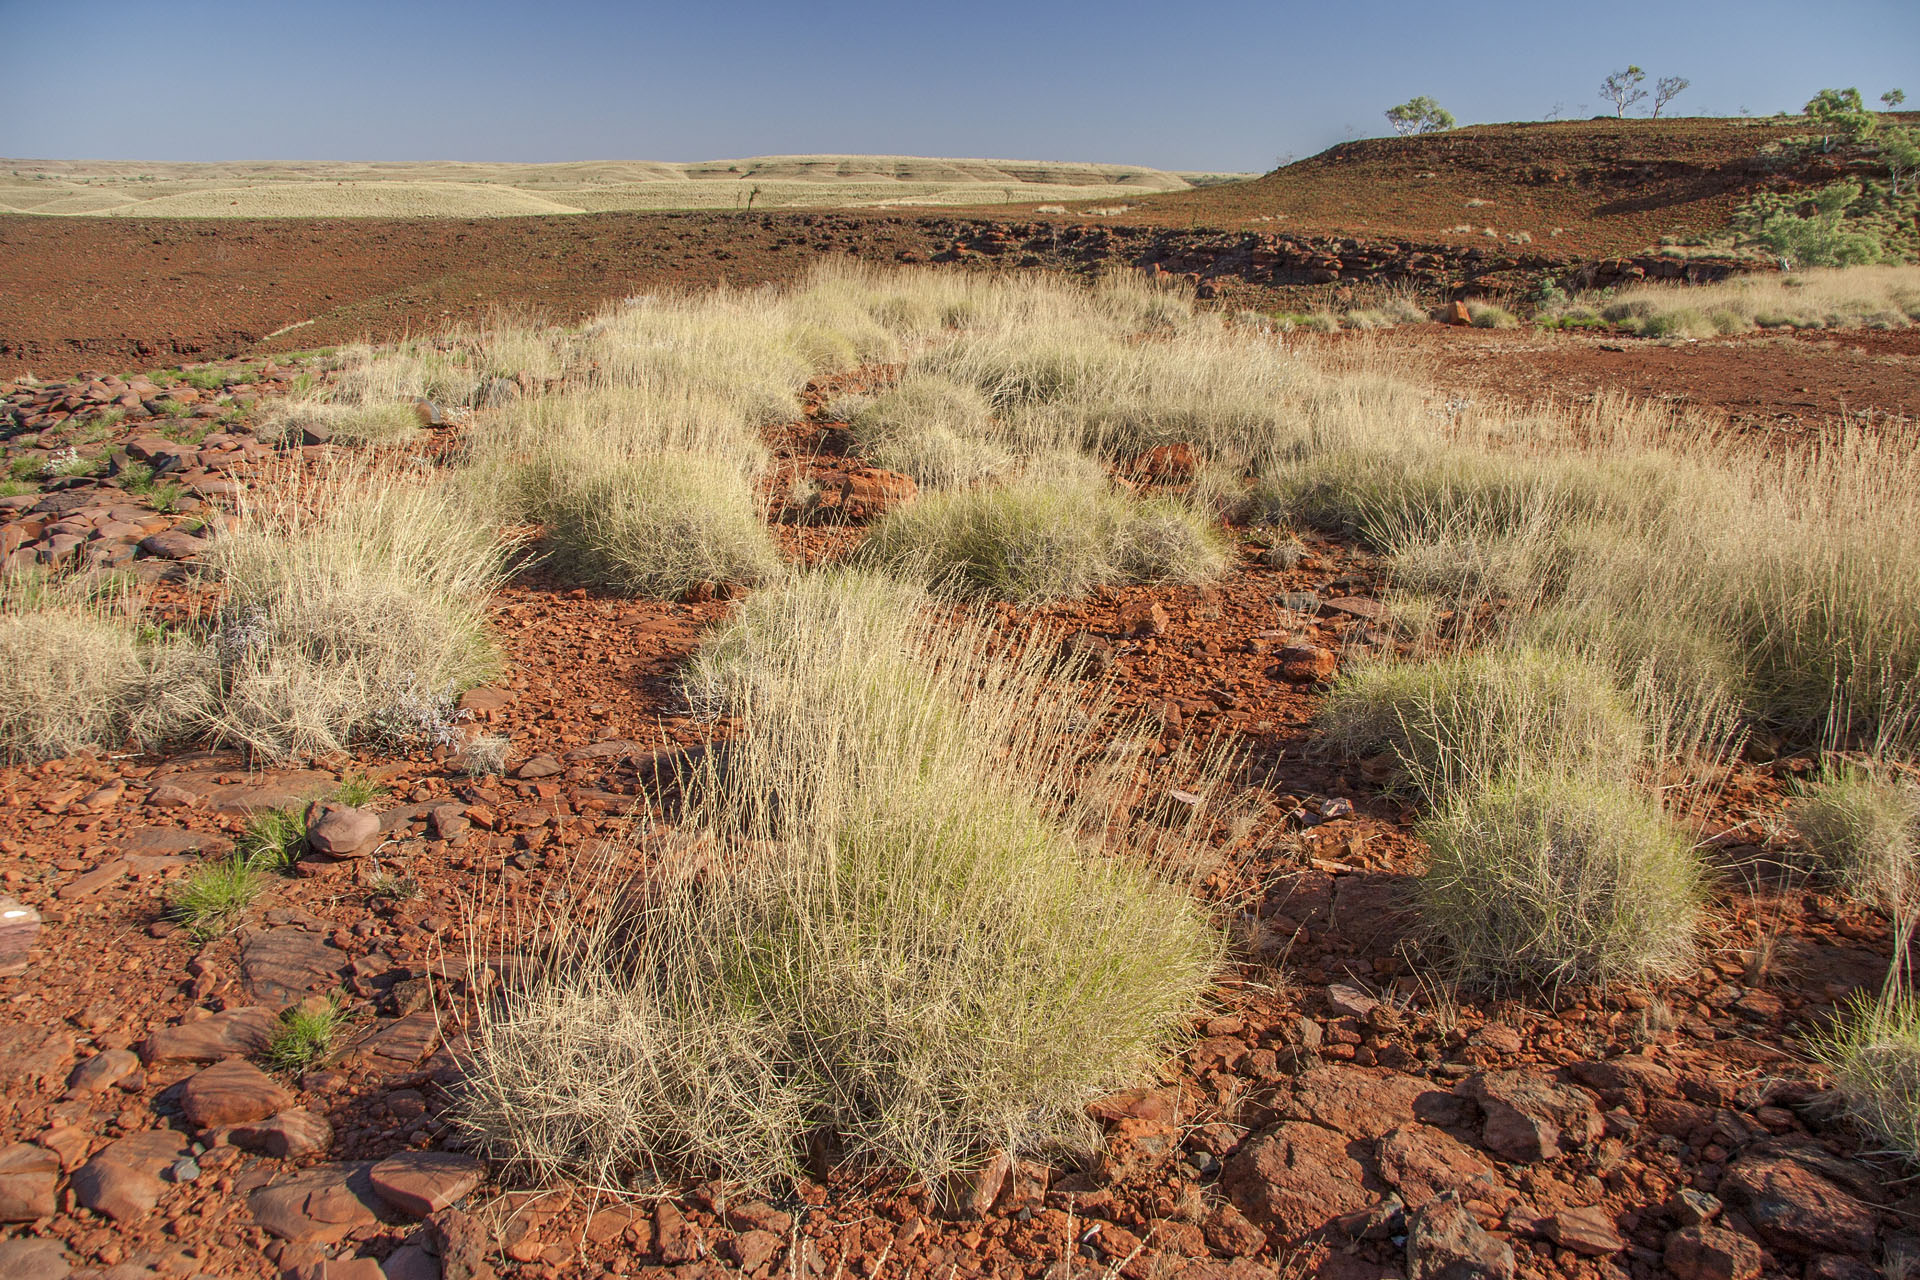 The ubiquitous spinifex.